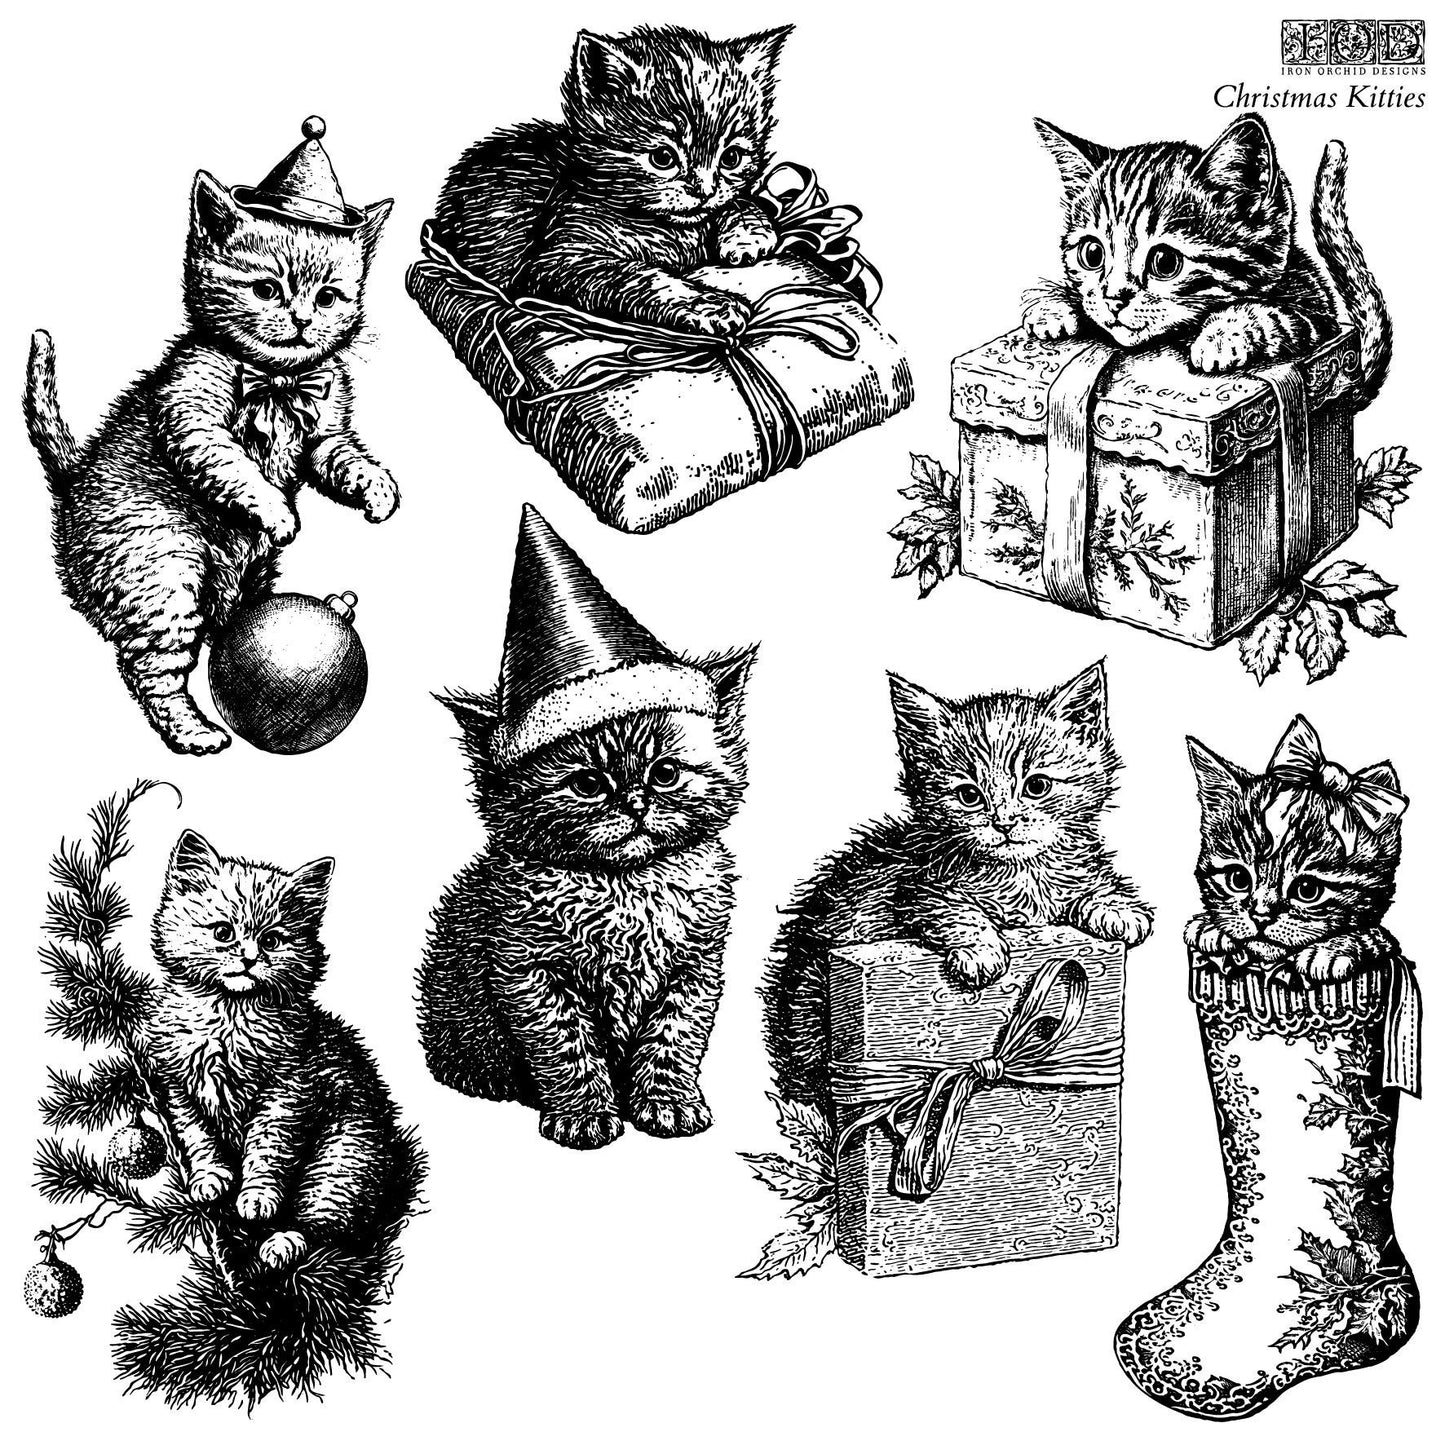 Christmas Kitties 12 x 12 IOD stamp - by Iron Orchid Designs Limited Christmas Release